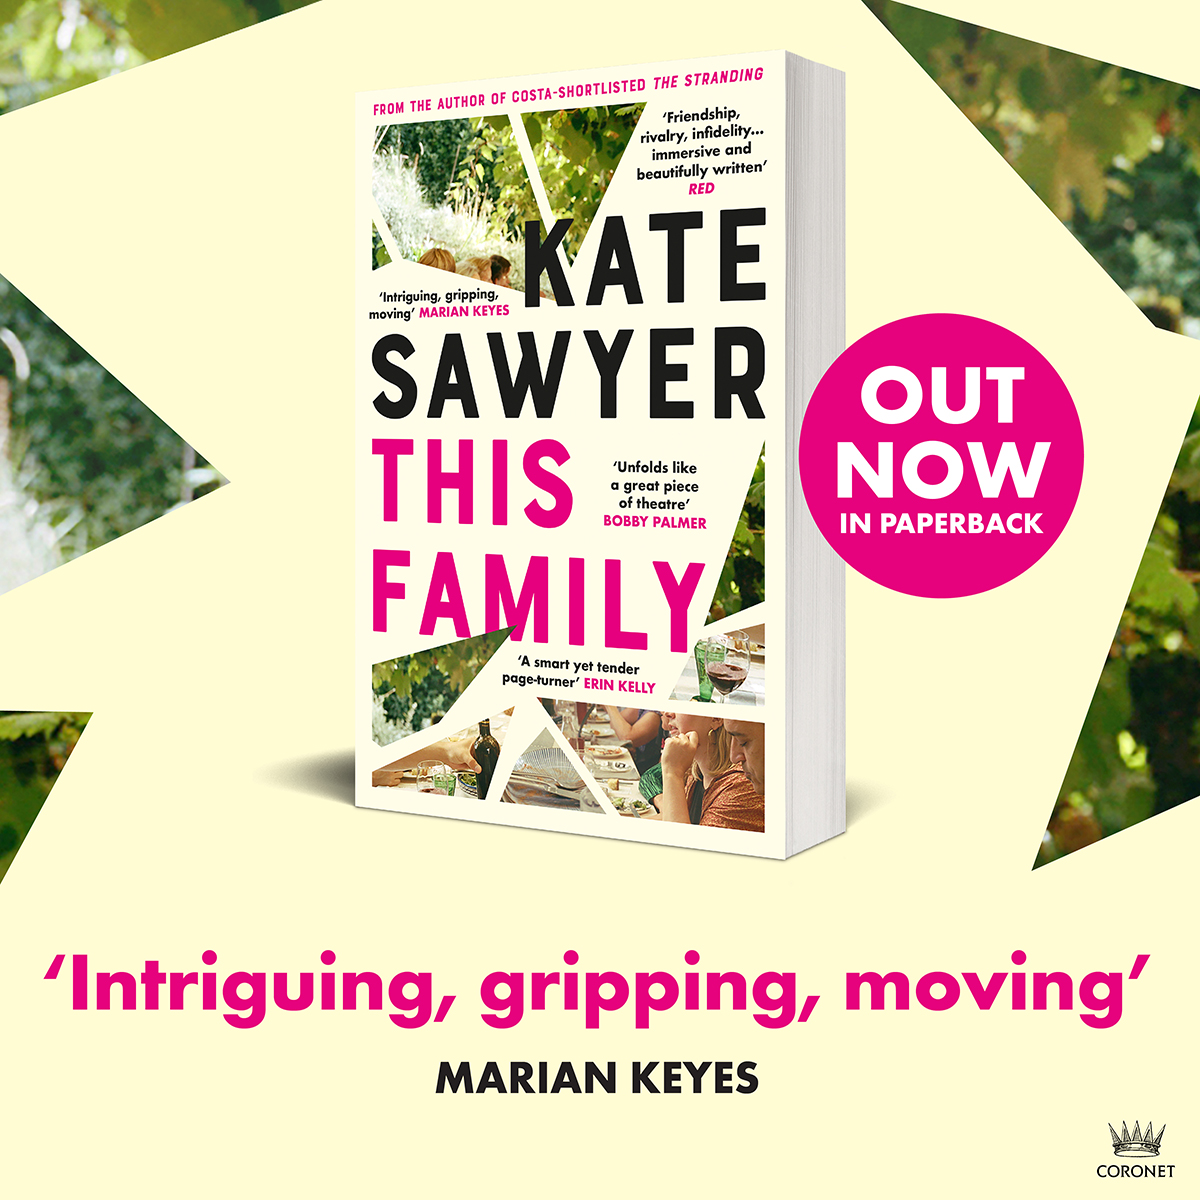 The ambitious new novel of family life past and present from the author of the Costa Book Awards shortlisted #TheStranding.

Win copies for your book club 👉 rebrand.ly/ef5630
⏰ 1 March

@HodderBooks@KateSawyer 

#ThisFamily